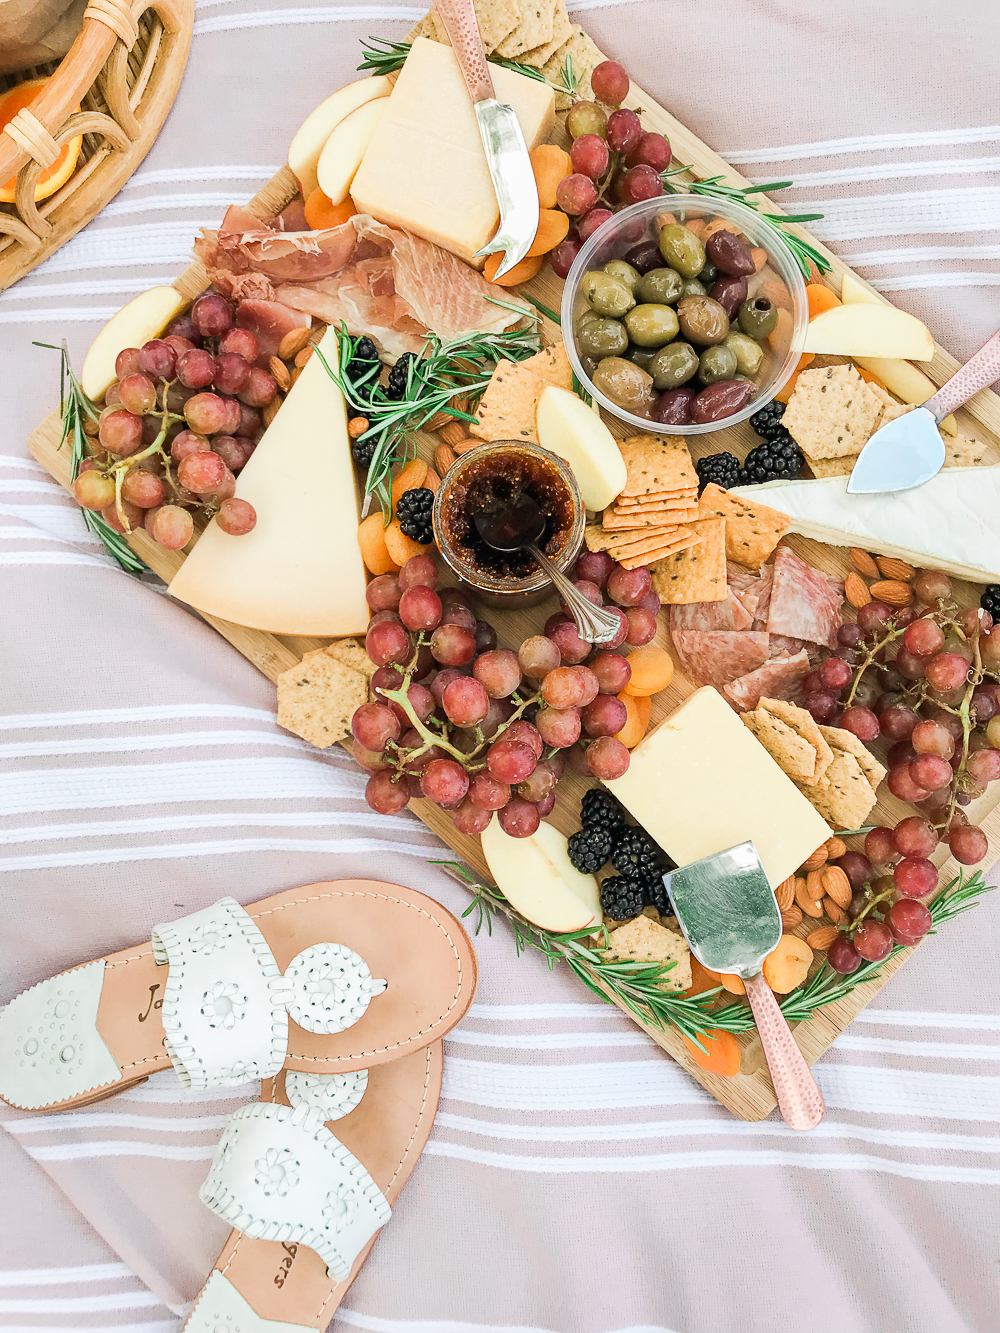 How to make the perfect cheese board by southern blogger Stephanie Ziajka from Diary of a Debutante